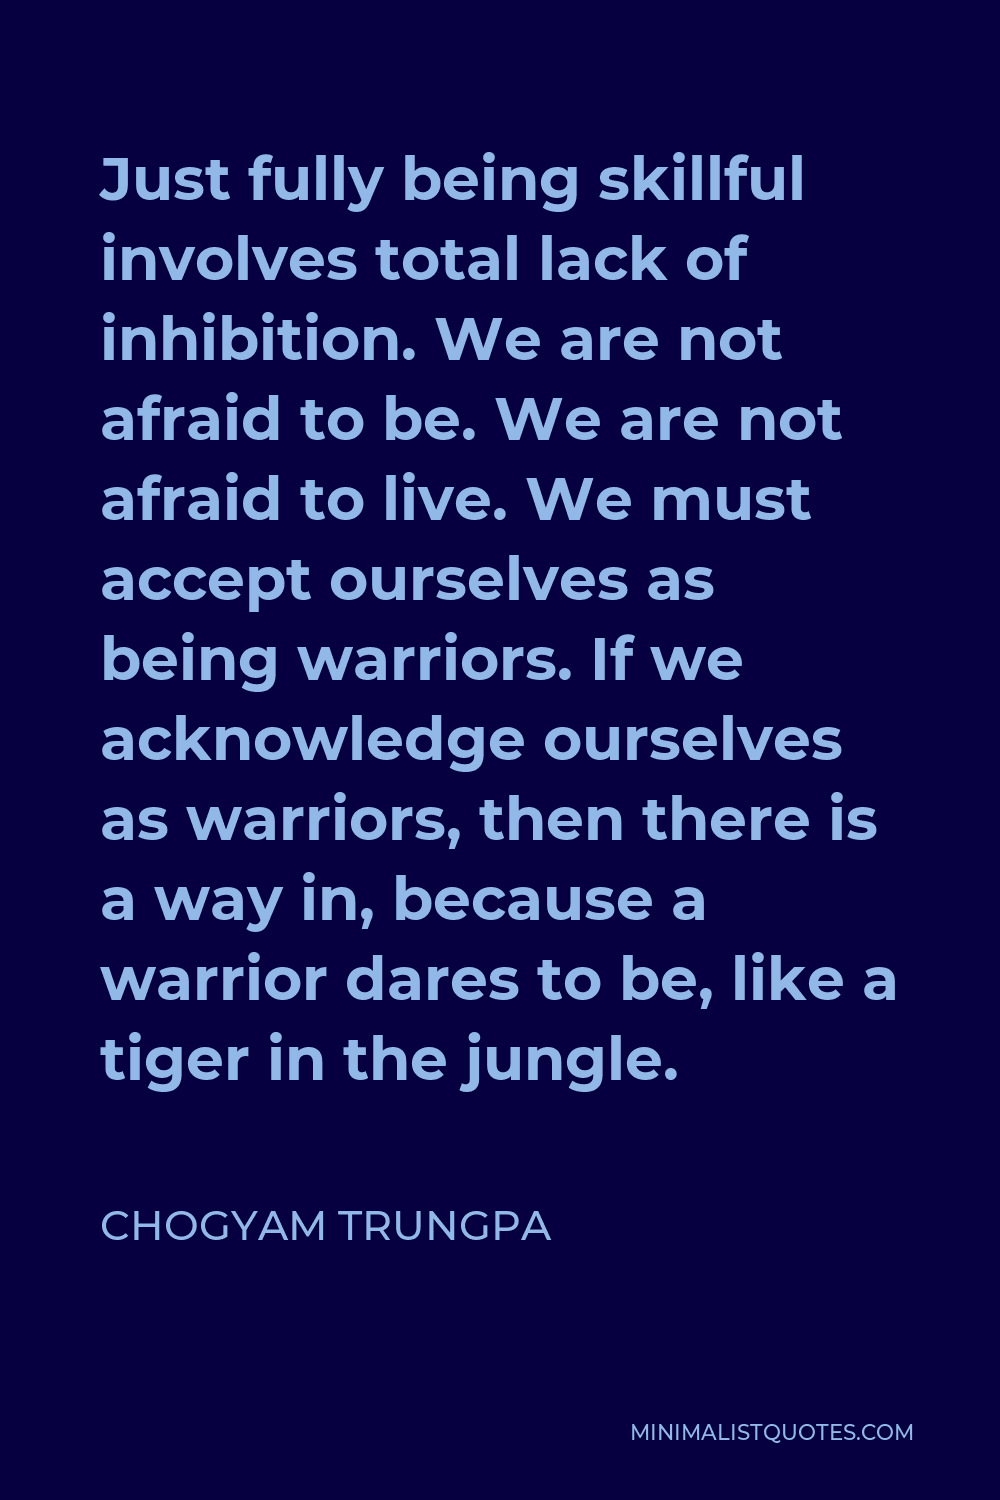 Chogyam Trungpa Quote - Just fully being skillful involves total lack of inhibition. We are not afraid to be. We are not afraid to live. We must accept ourselves as being warriors. If we acknowledge ourselves as warriors, then there is a way in, because a warrior dares to be, like a tiger in the jungle.